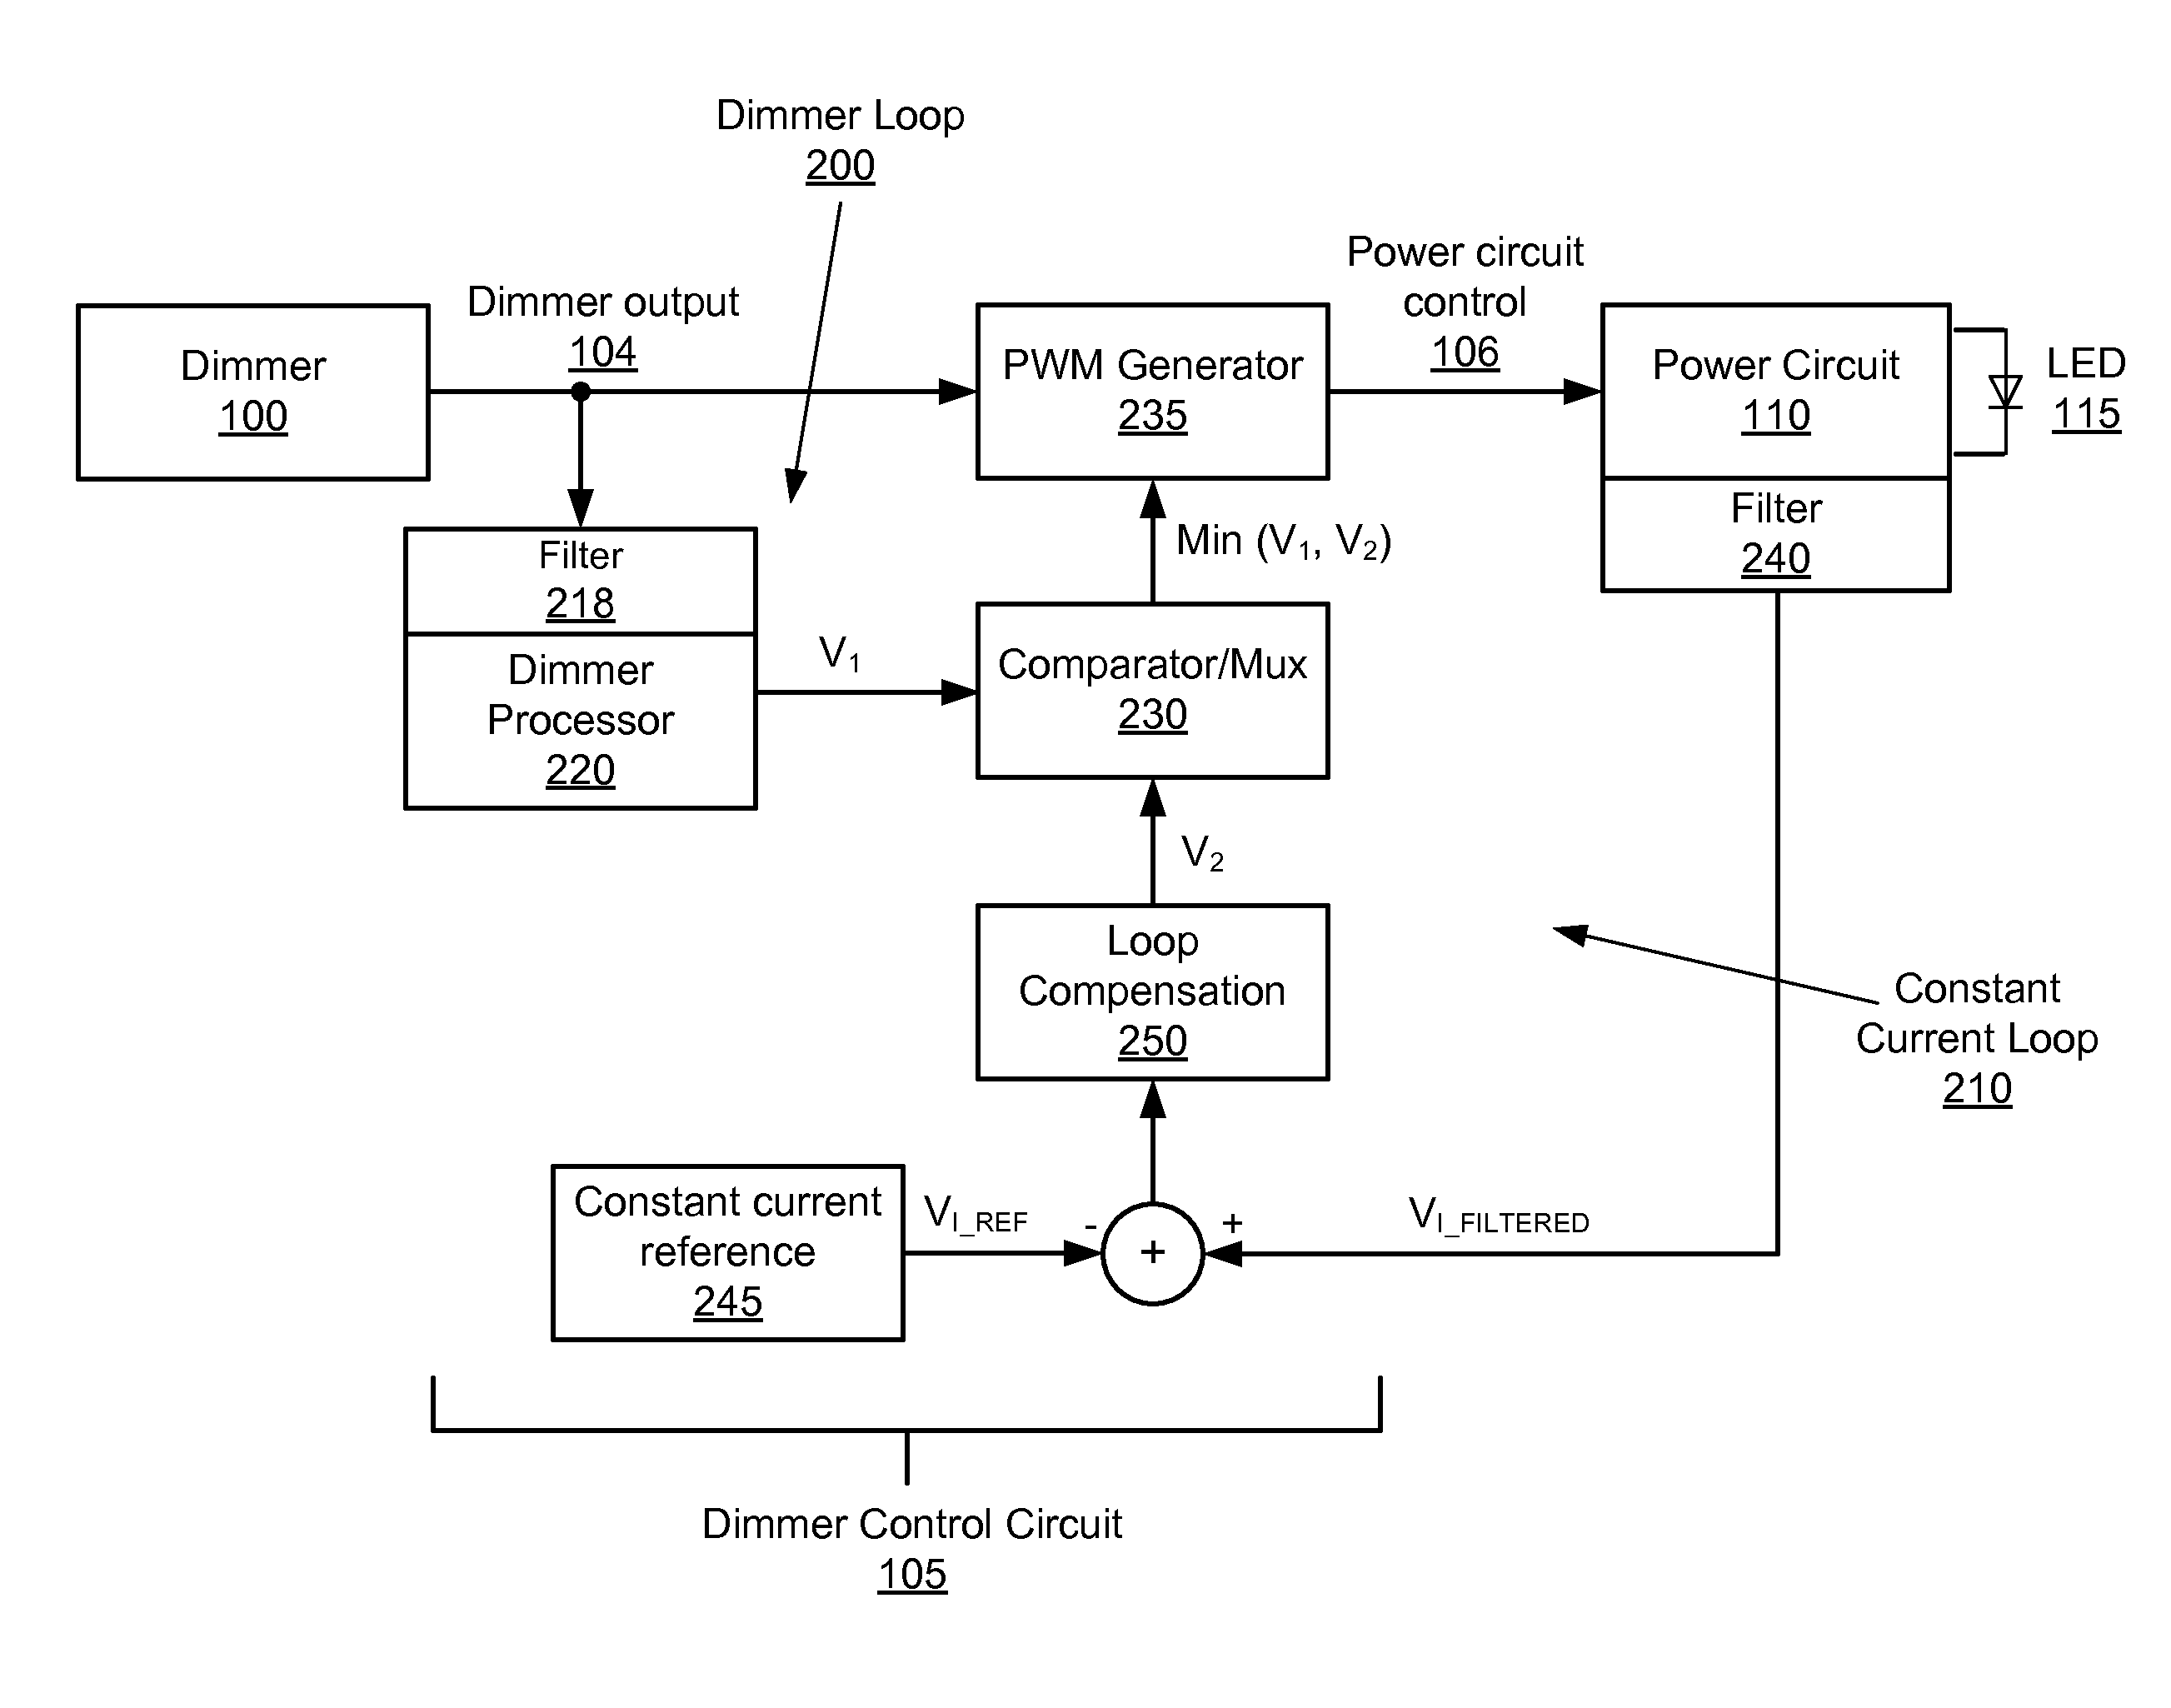 Filter bandwidth adjustment in a multi-loop dimmer control circuit